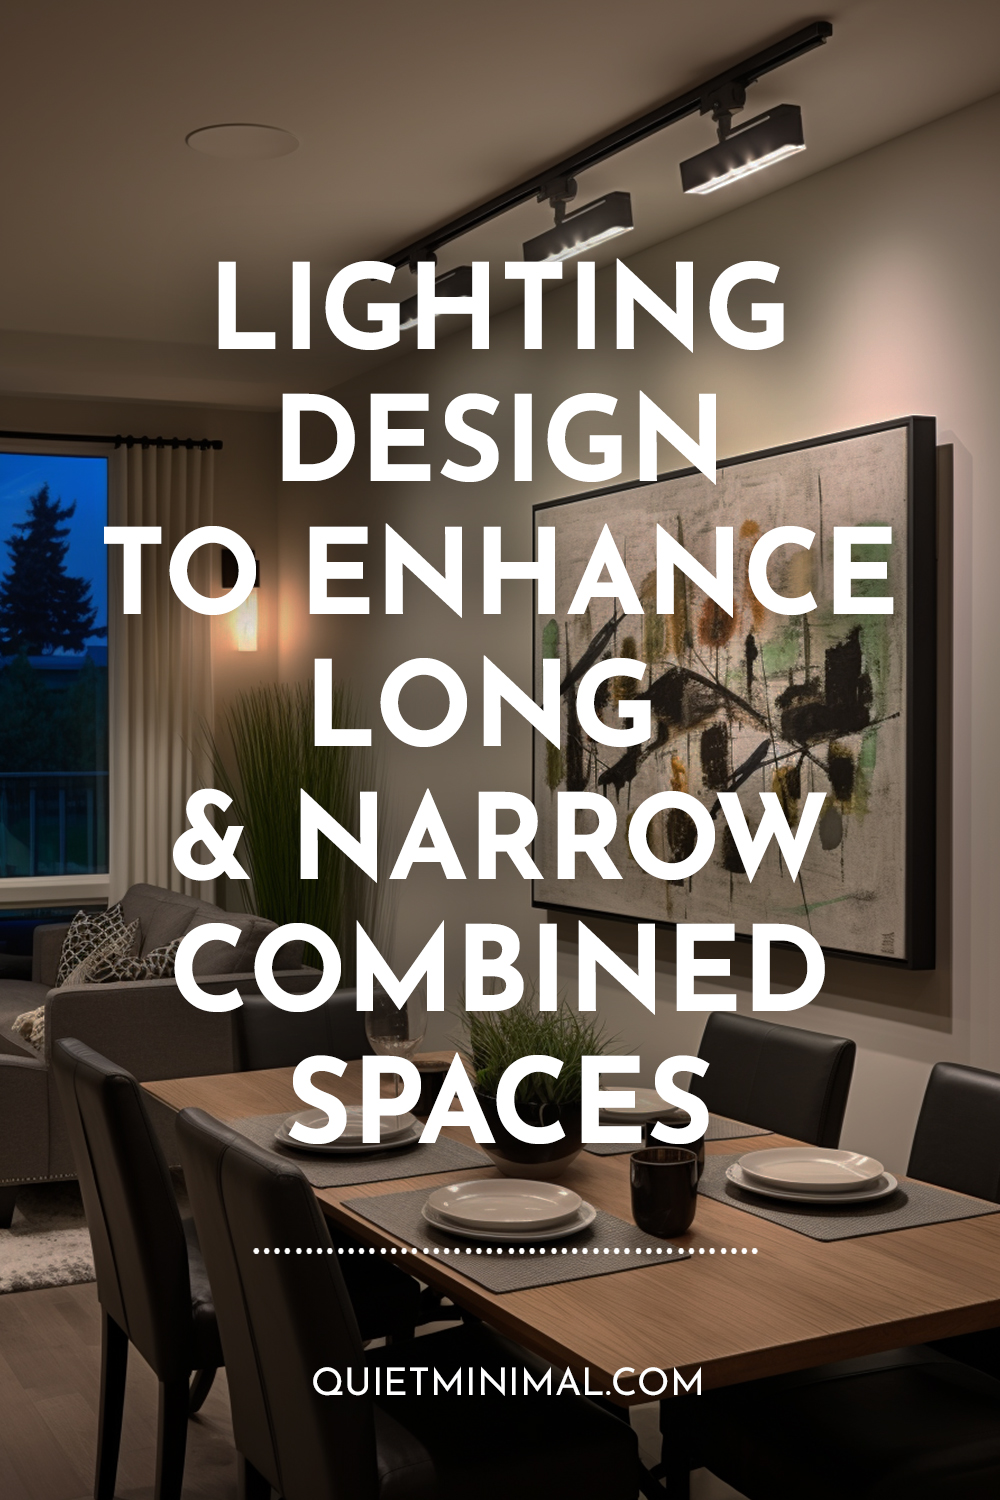 Lighting design to enhance long and narrow combined spaces.